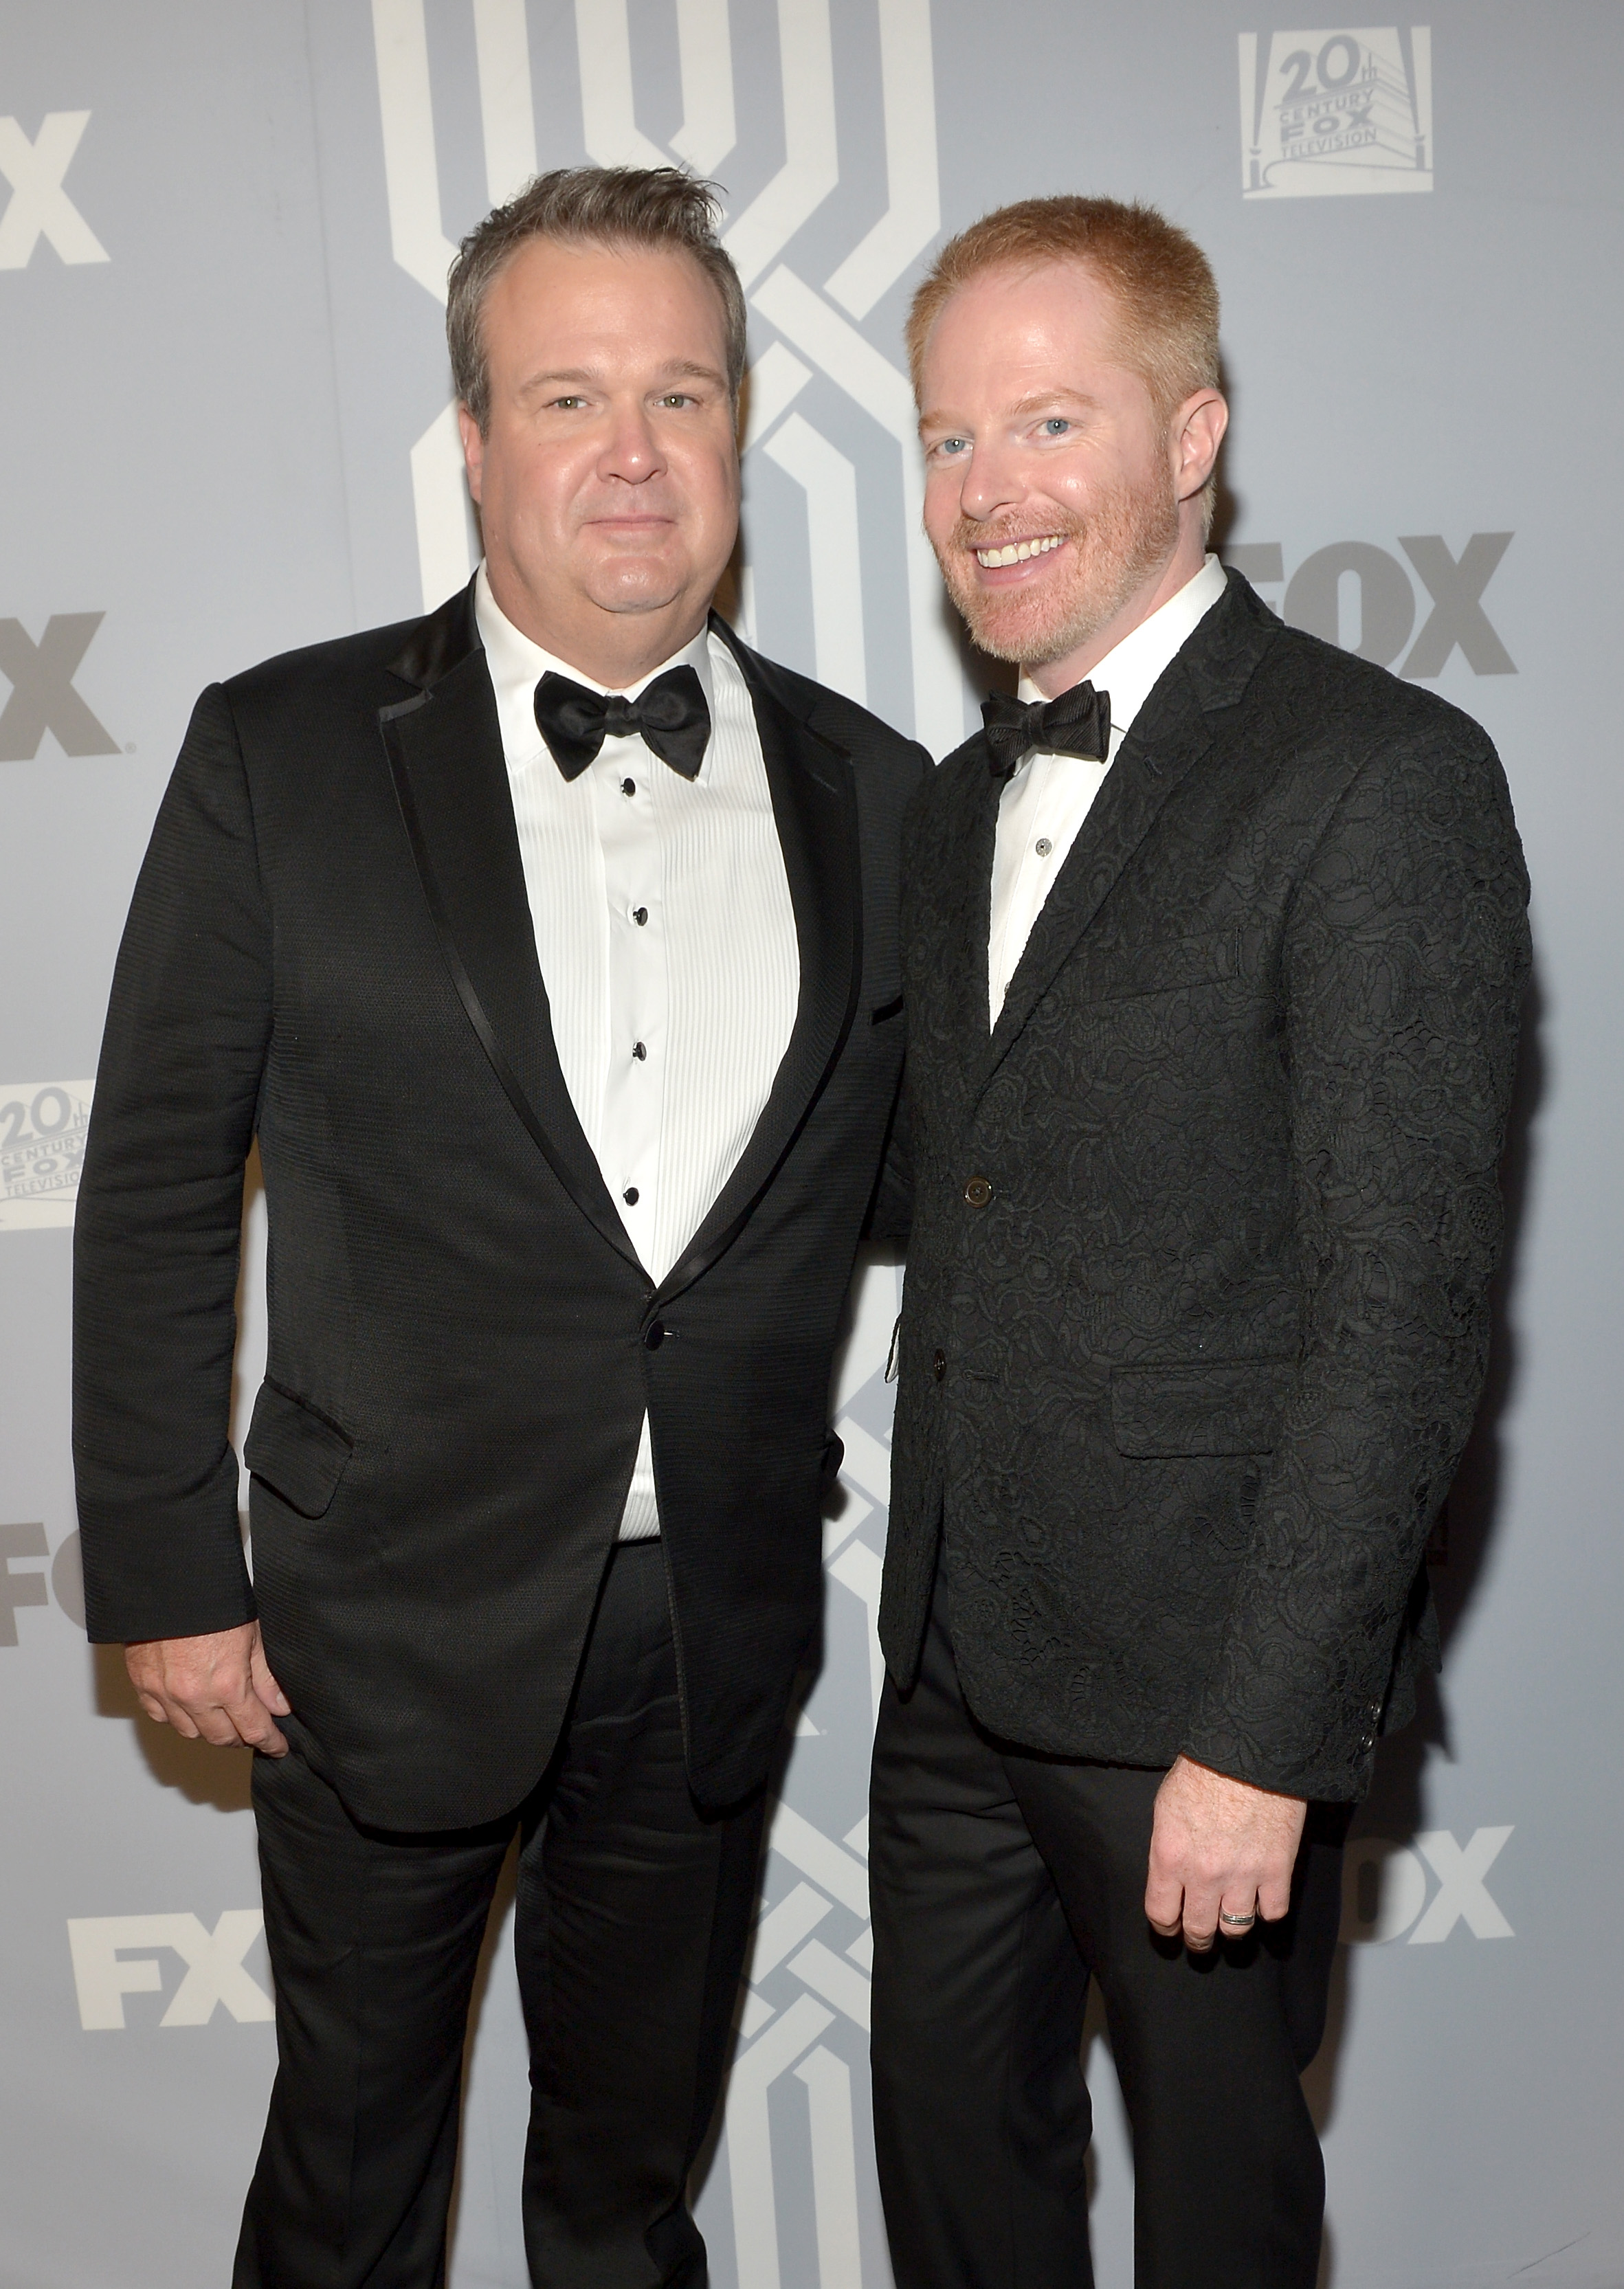 Fox Broadcasting Company, Twentieth Century Fox Television And FX Proudly Celebrate Their 2013 EMMY Nominees - Red Carpet